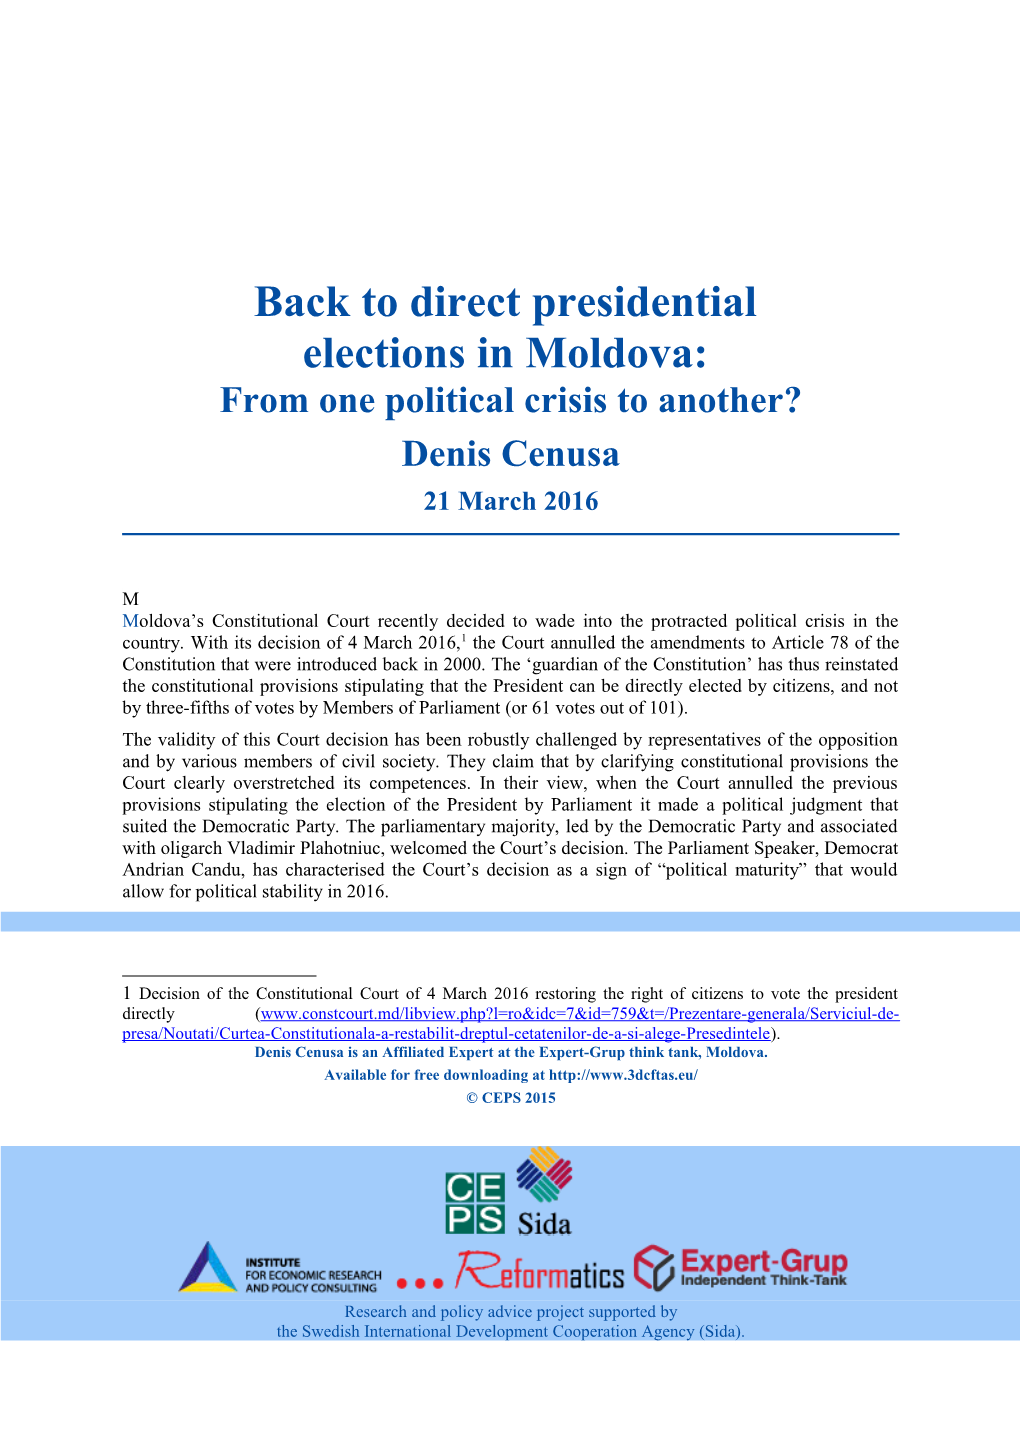 Back to Direct Presidential Elections in Moldova: from One Political Crisis to Another? 1